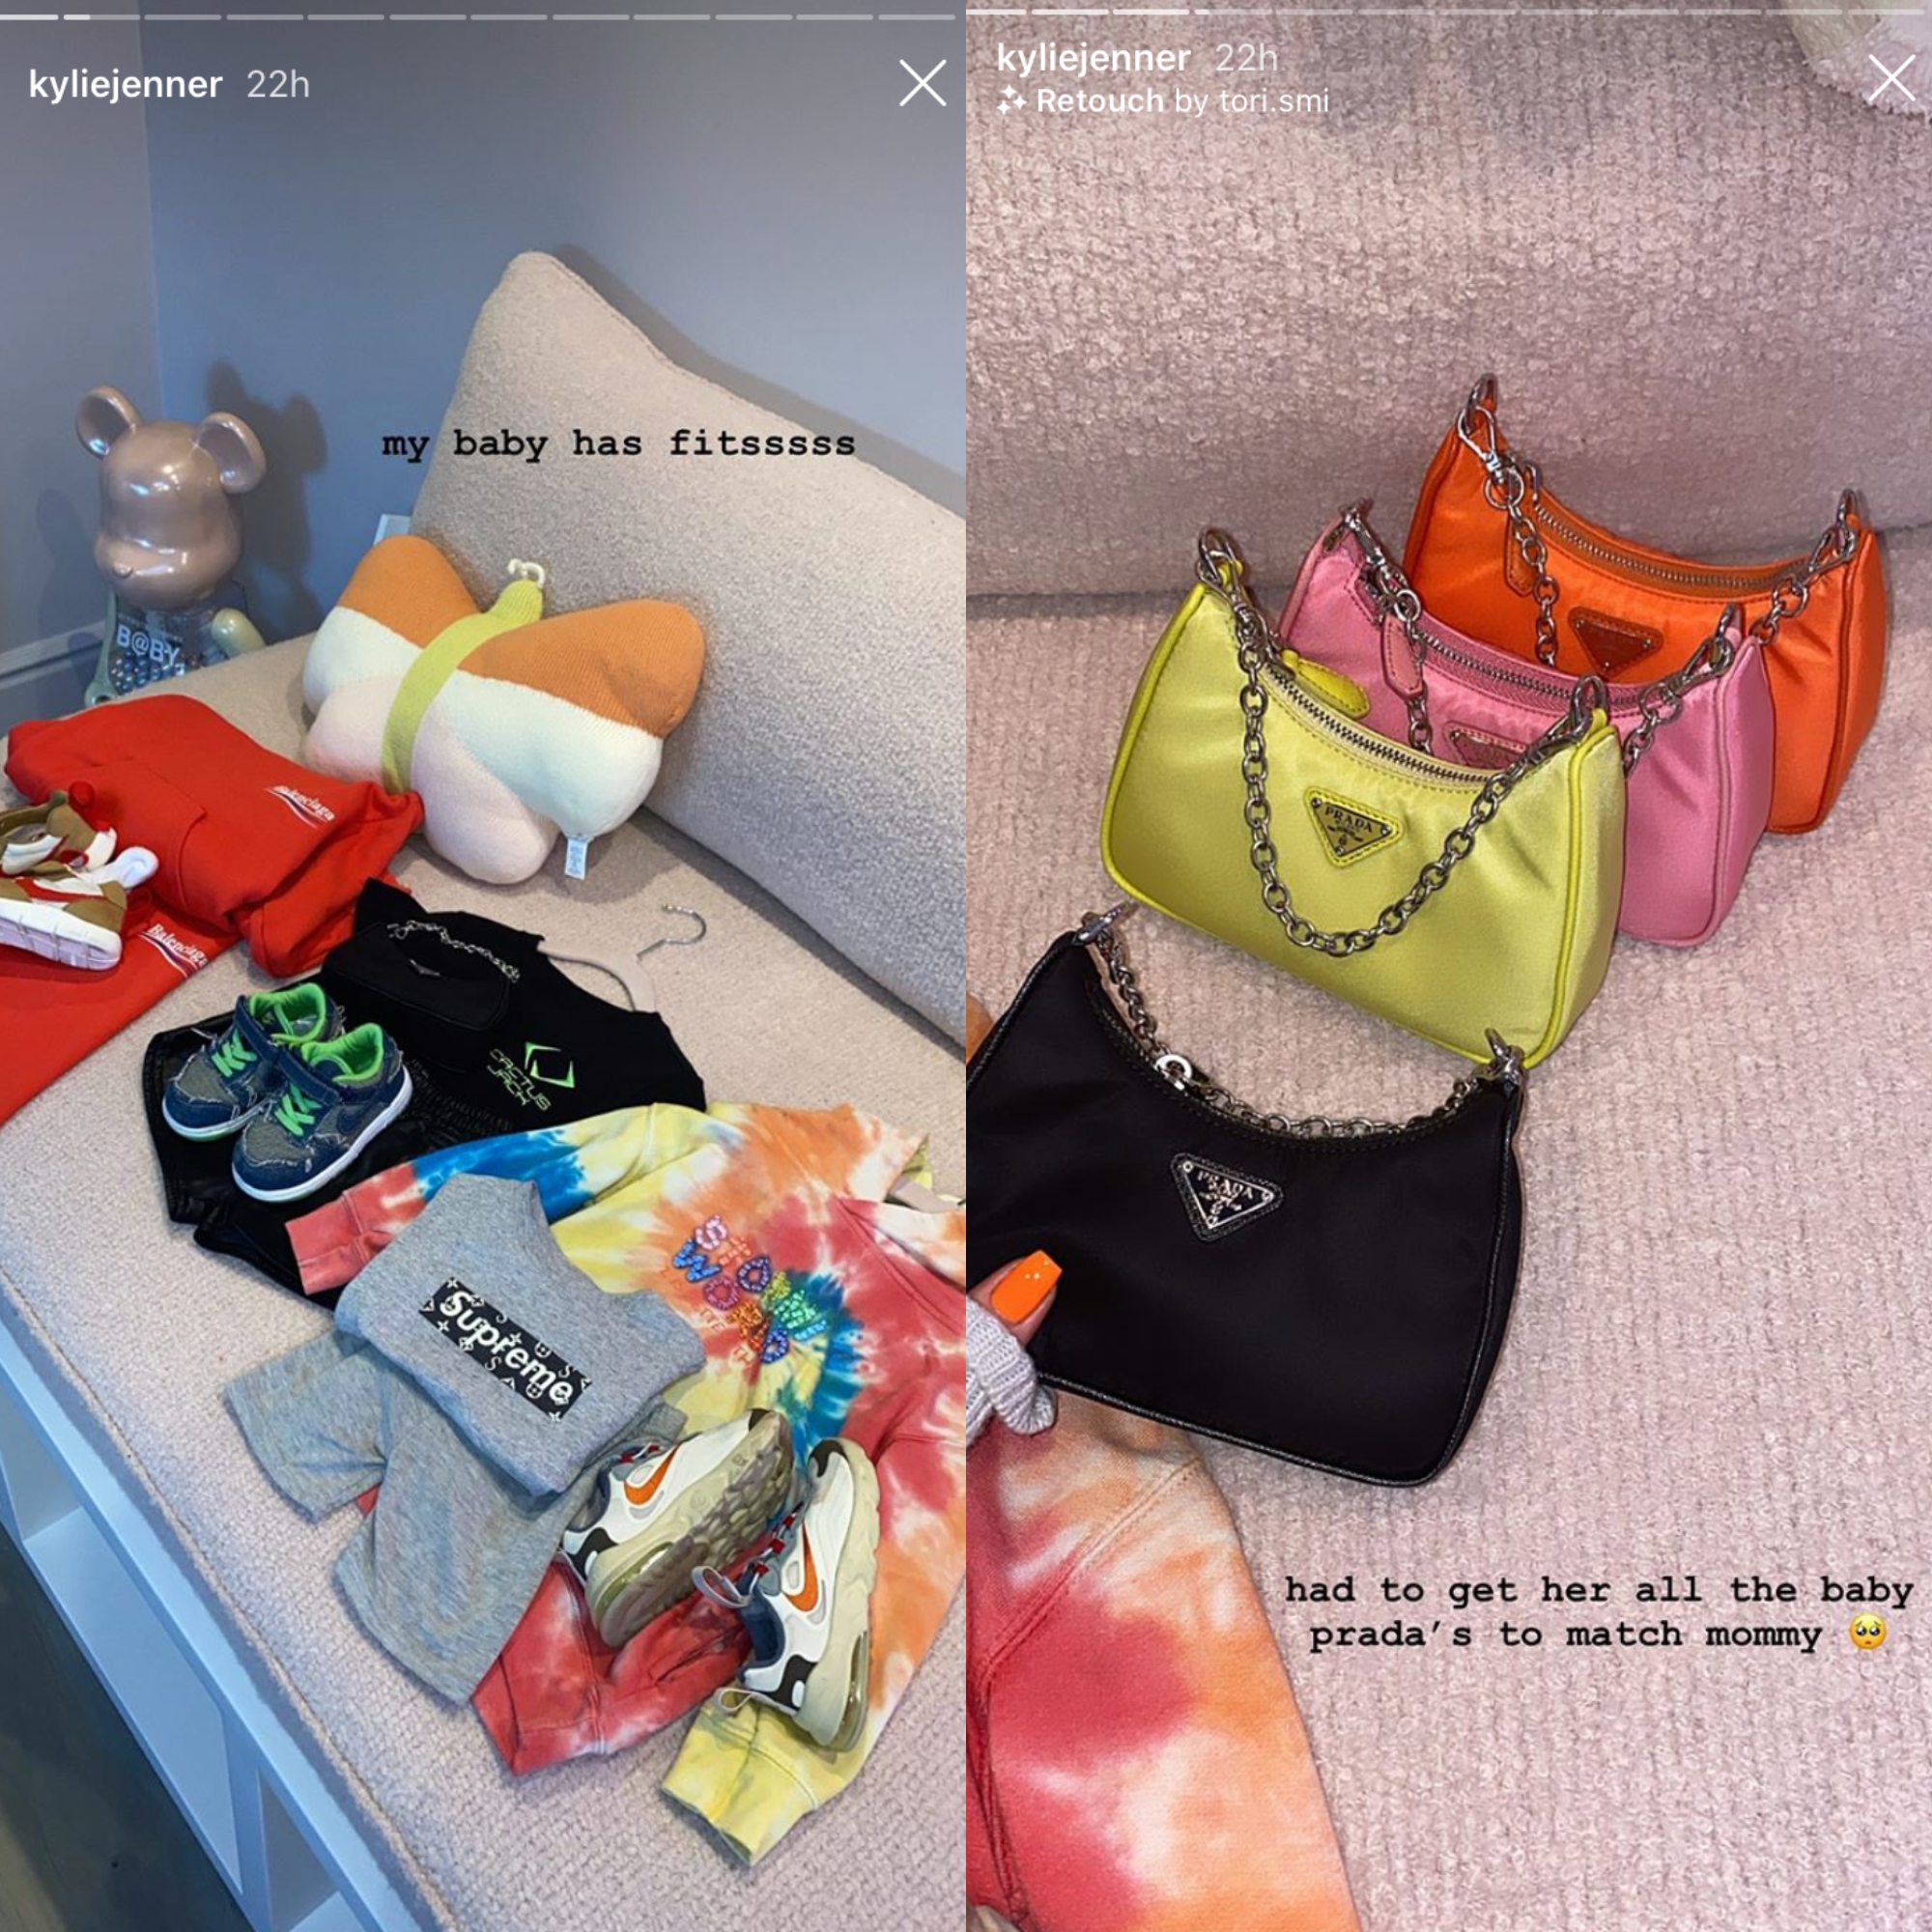 Did Kylie Jenner's baby Stormi Webster really ask for a Birkin bag